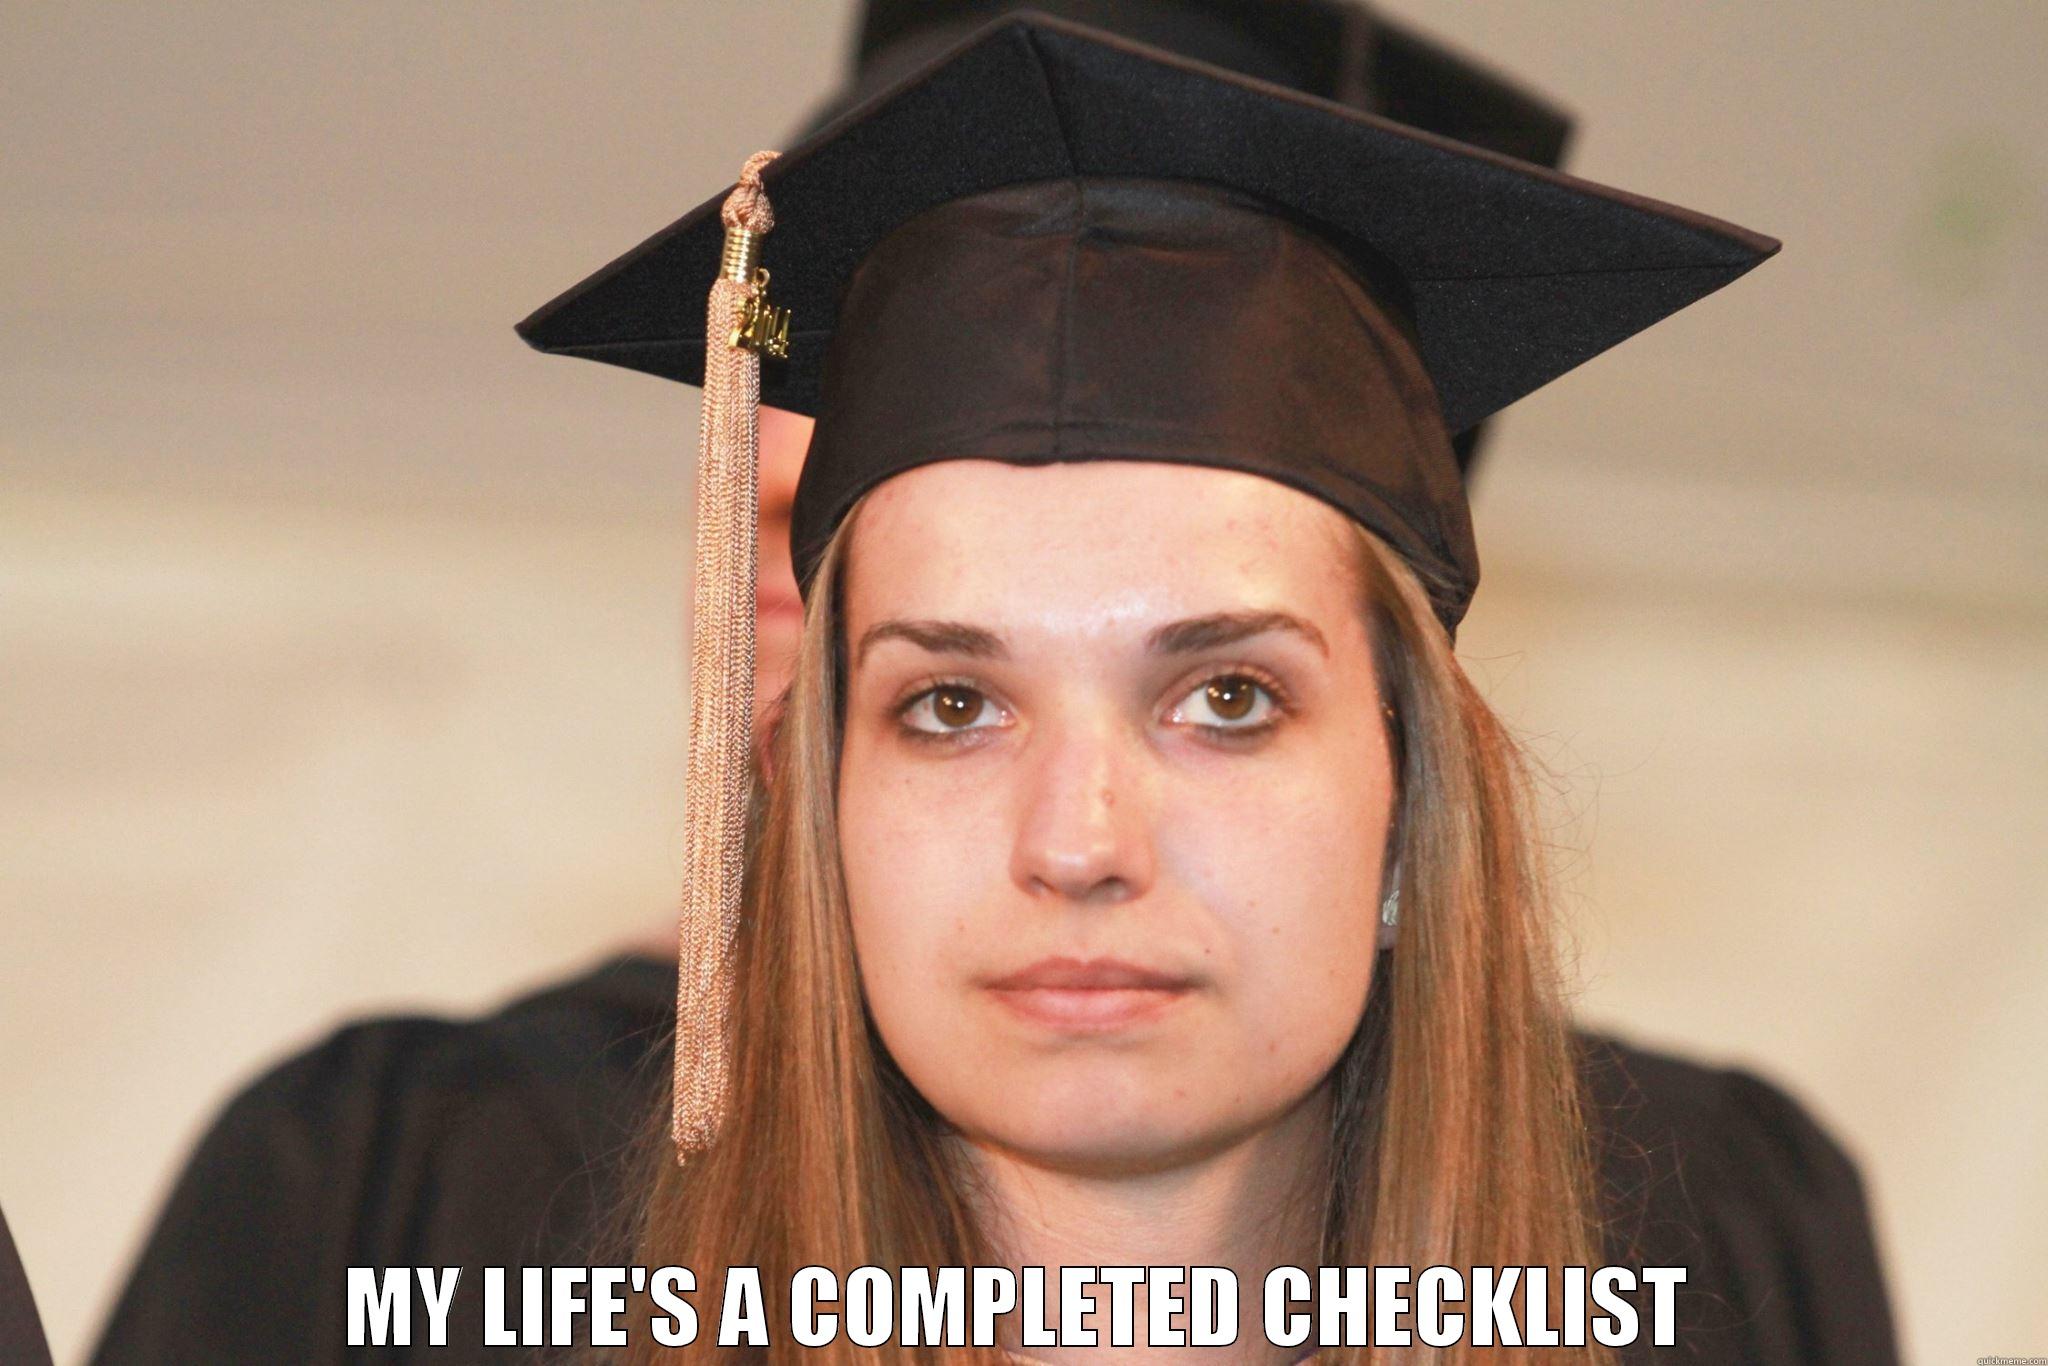  MY LIFE'S A COMPLETED CHECKLIST Misc